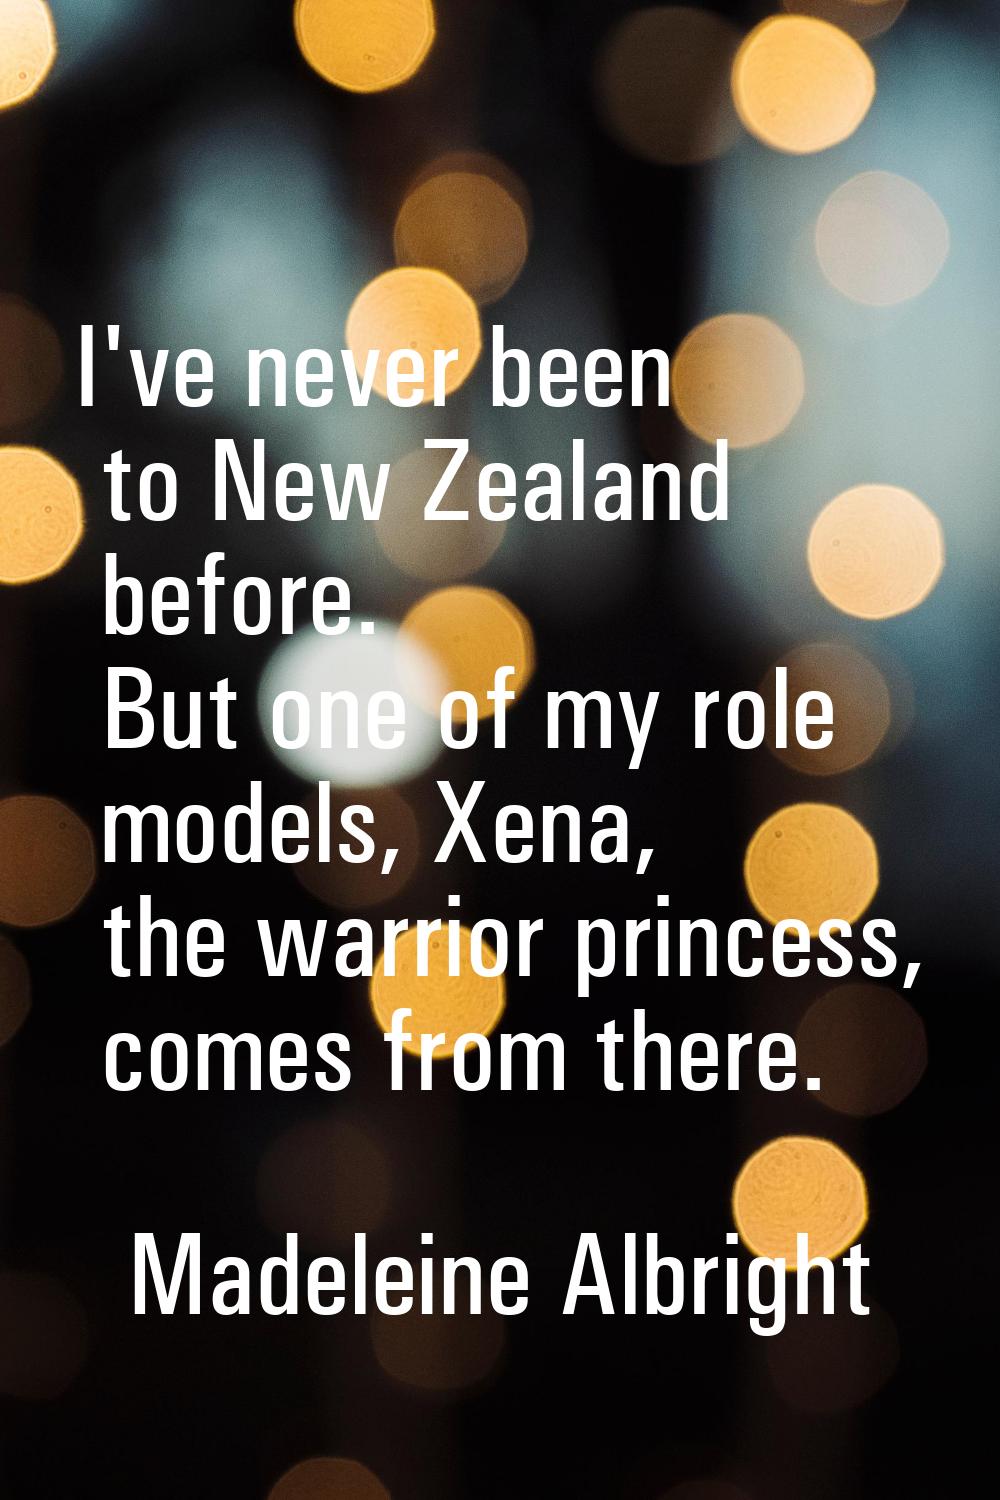 I've never been to New Zealand before. But one of my role models, Xena, the warrior princess, comes